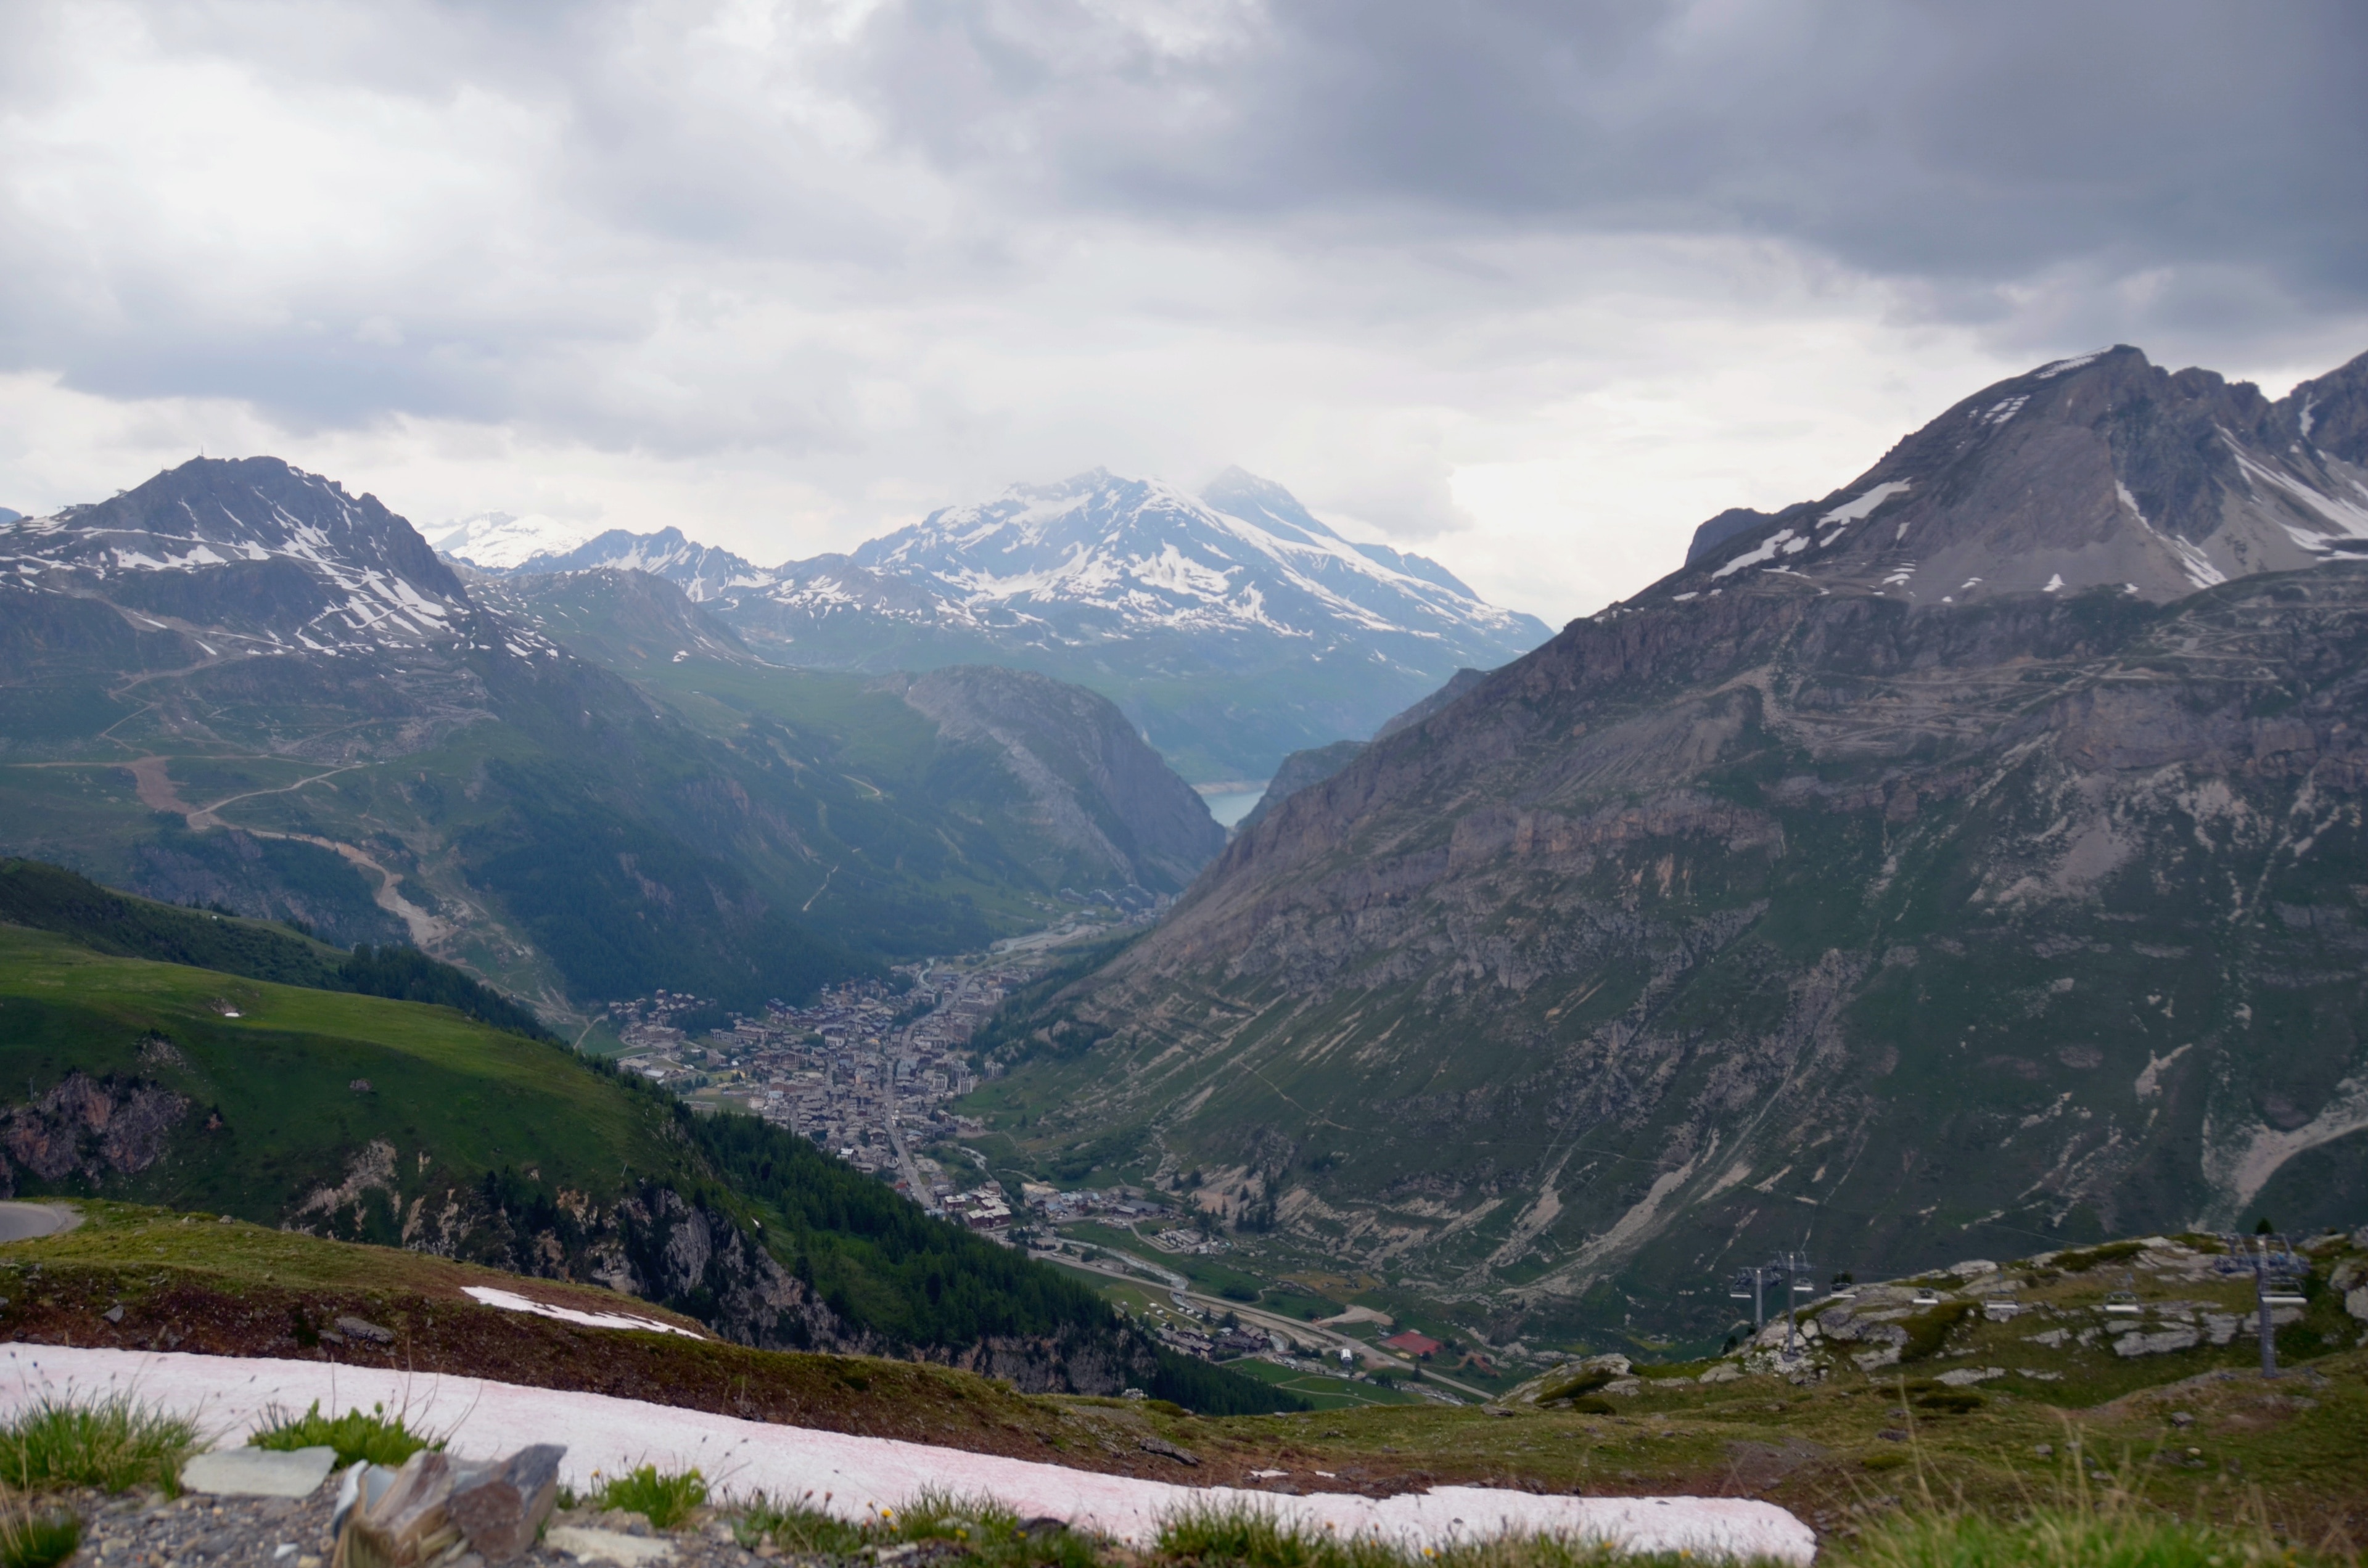 Climbing with the car to Col d'Iseran at the end of the Isere valley there is a good view at Val d'Isere 1800 m